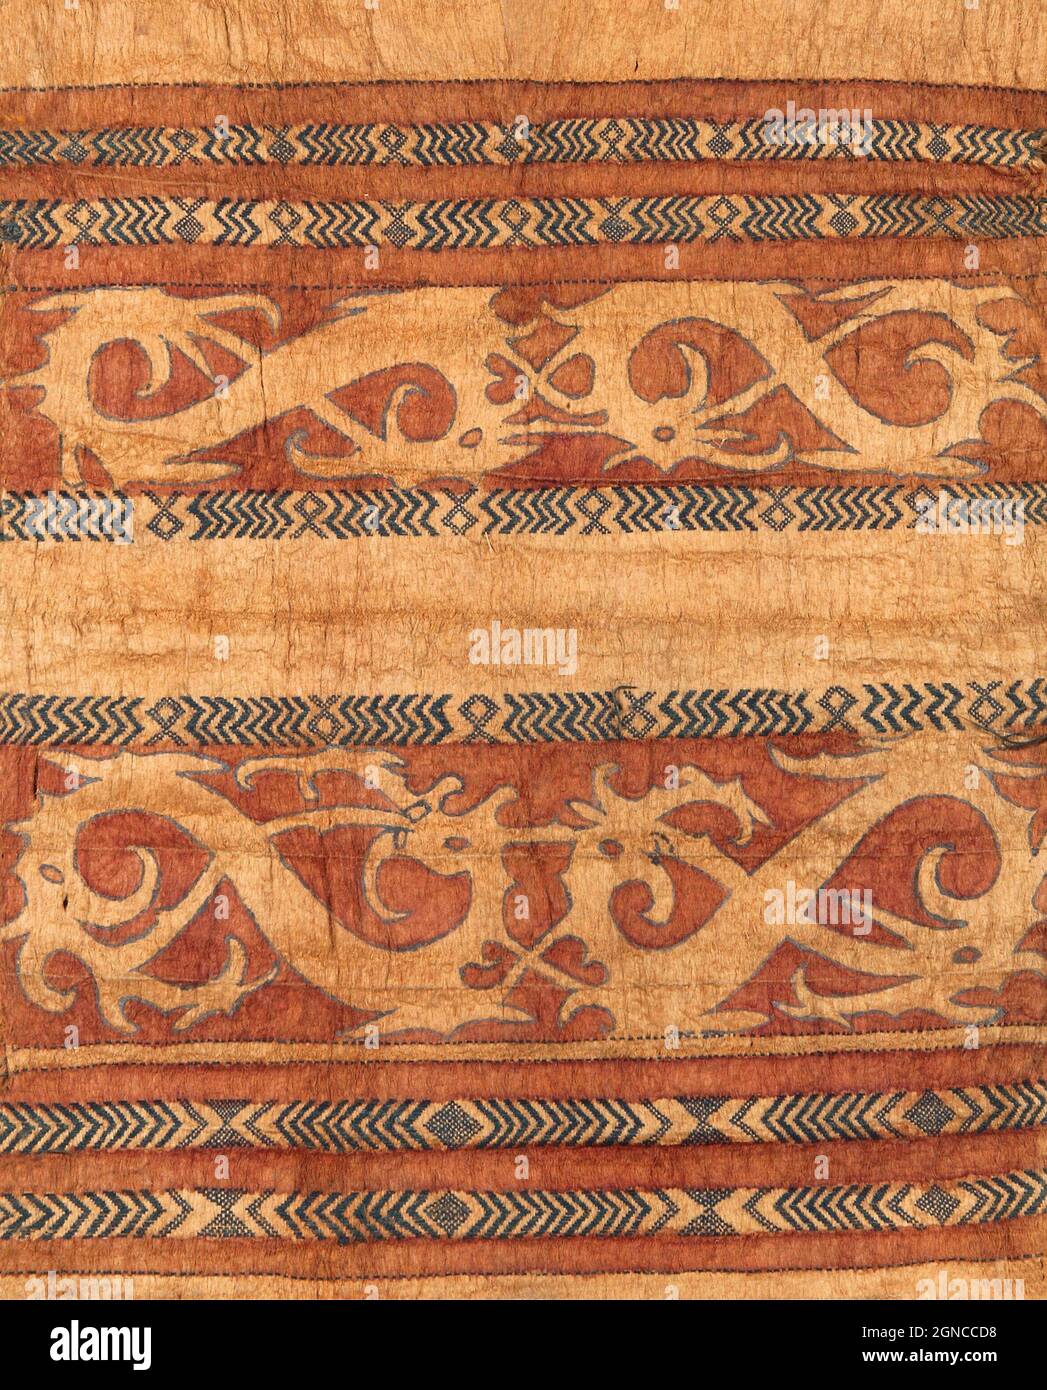 Detail of a Dayak jacket made of beaten bark. This kind of barkcloth clothing was widely worn by various Dayak peoples. However, these were mostly undecorated. Those with decorations like this were intended for the upper classes. They probably wore these jackets on special occasions. The water serpent, also known as the dragon or naga, was a symbol of various Dayak sub-groups. Stock Photo